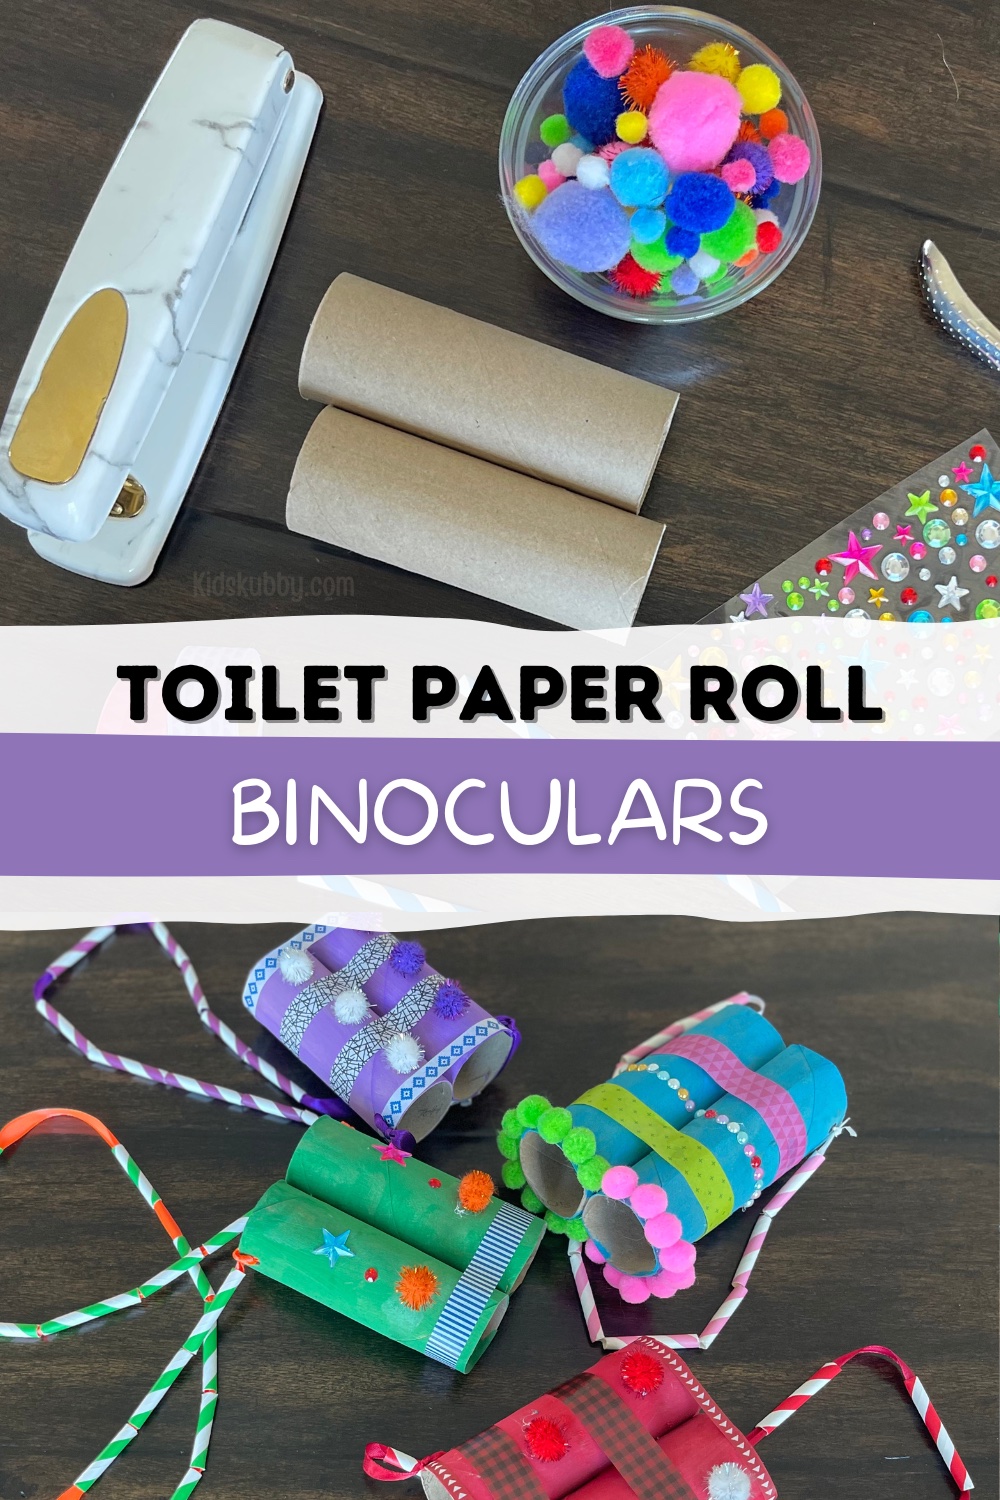 Toilet Paper Roll Binoculars craft for kids! A super fun and easy project for kids of all ages including toddlers, preschoolers and elementary age children. This budget project is so simple to make with just a few cheap supplies that you probably already have at home. 